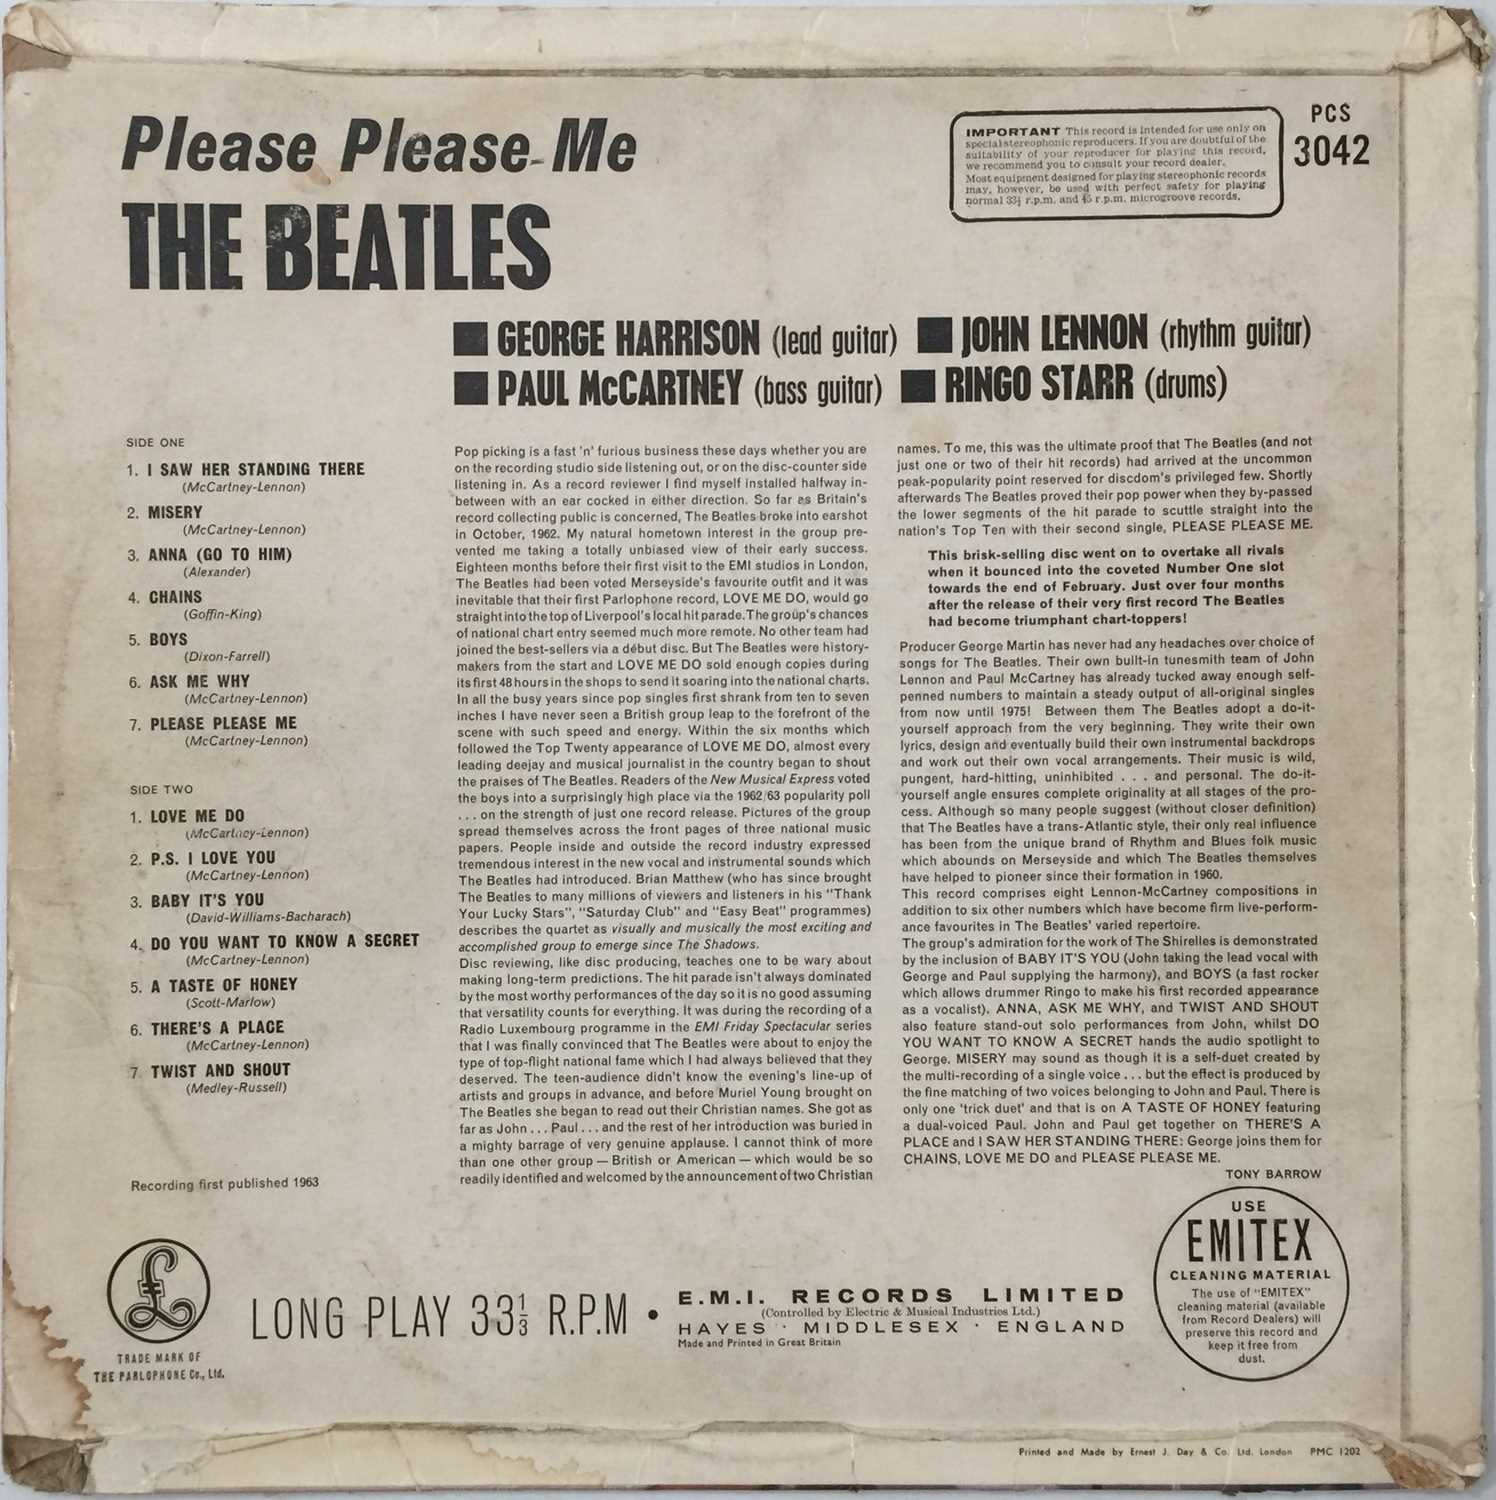 THE BEATLES - PLEASE PLEASE ME LP (ORIGINAL UK STEREO 'BLACK AND GOLD' PCS 3042) - Image 3 of 5